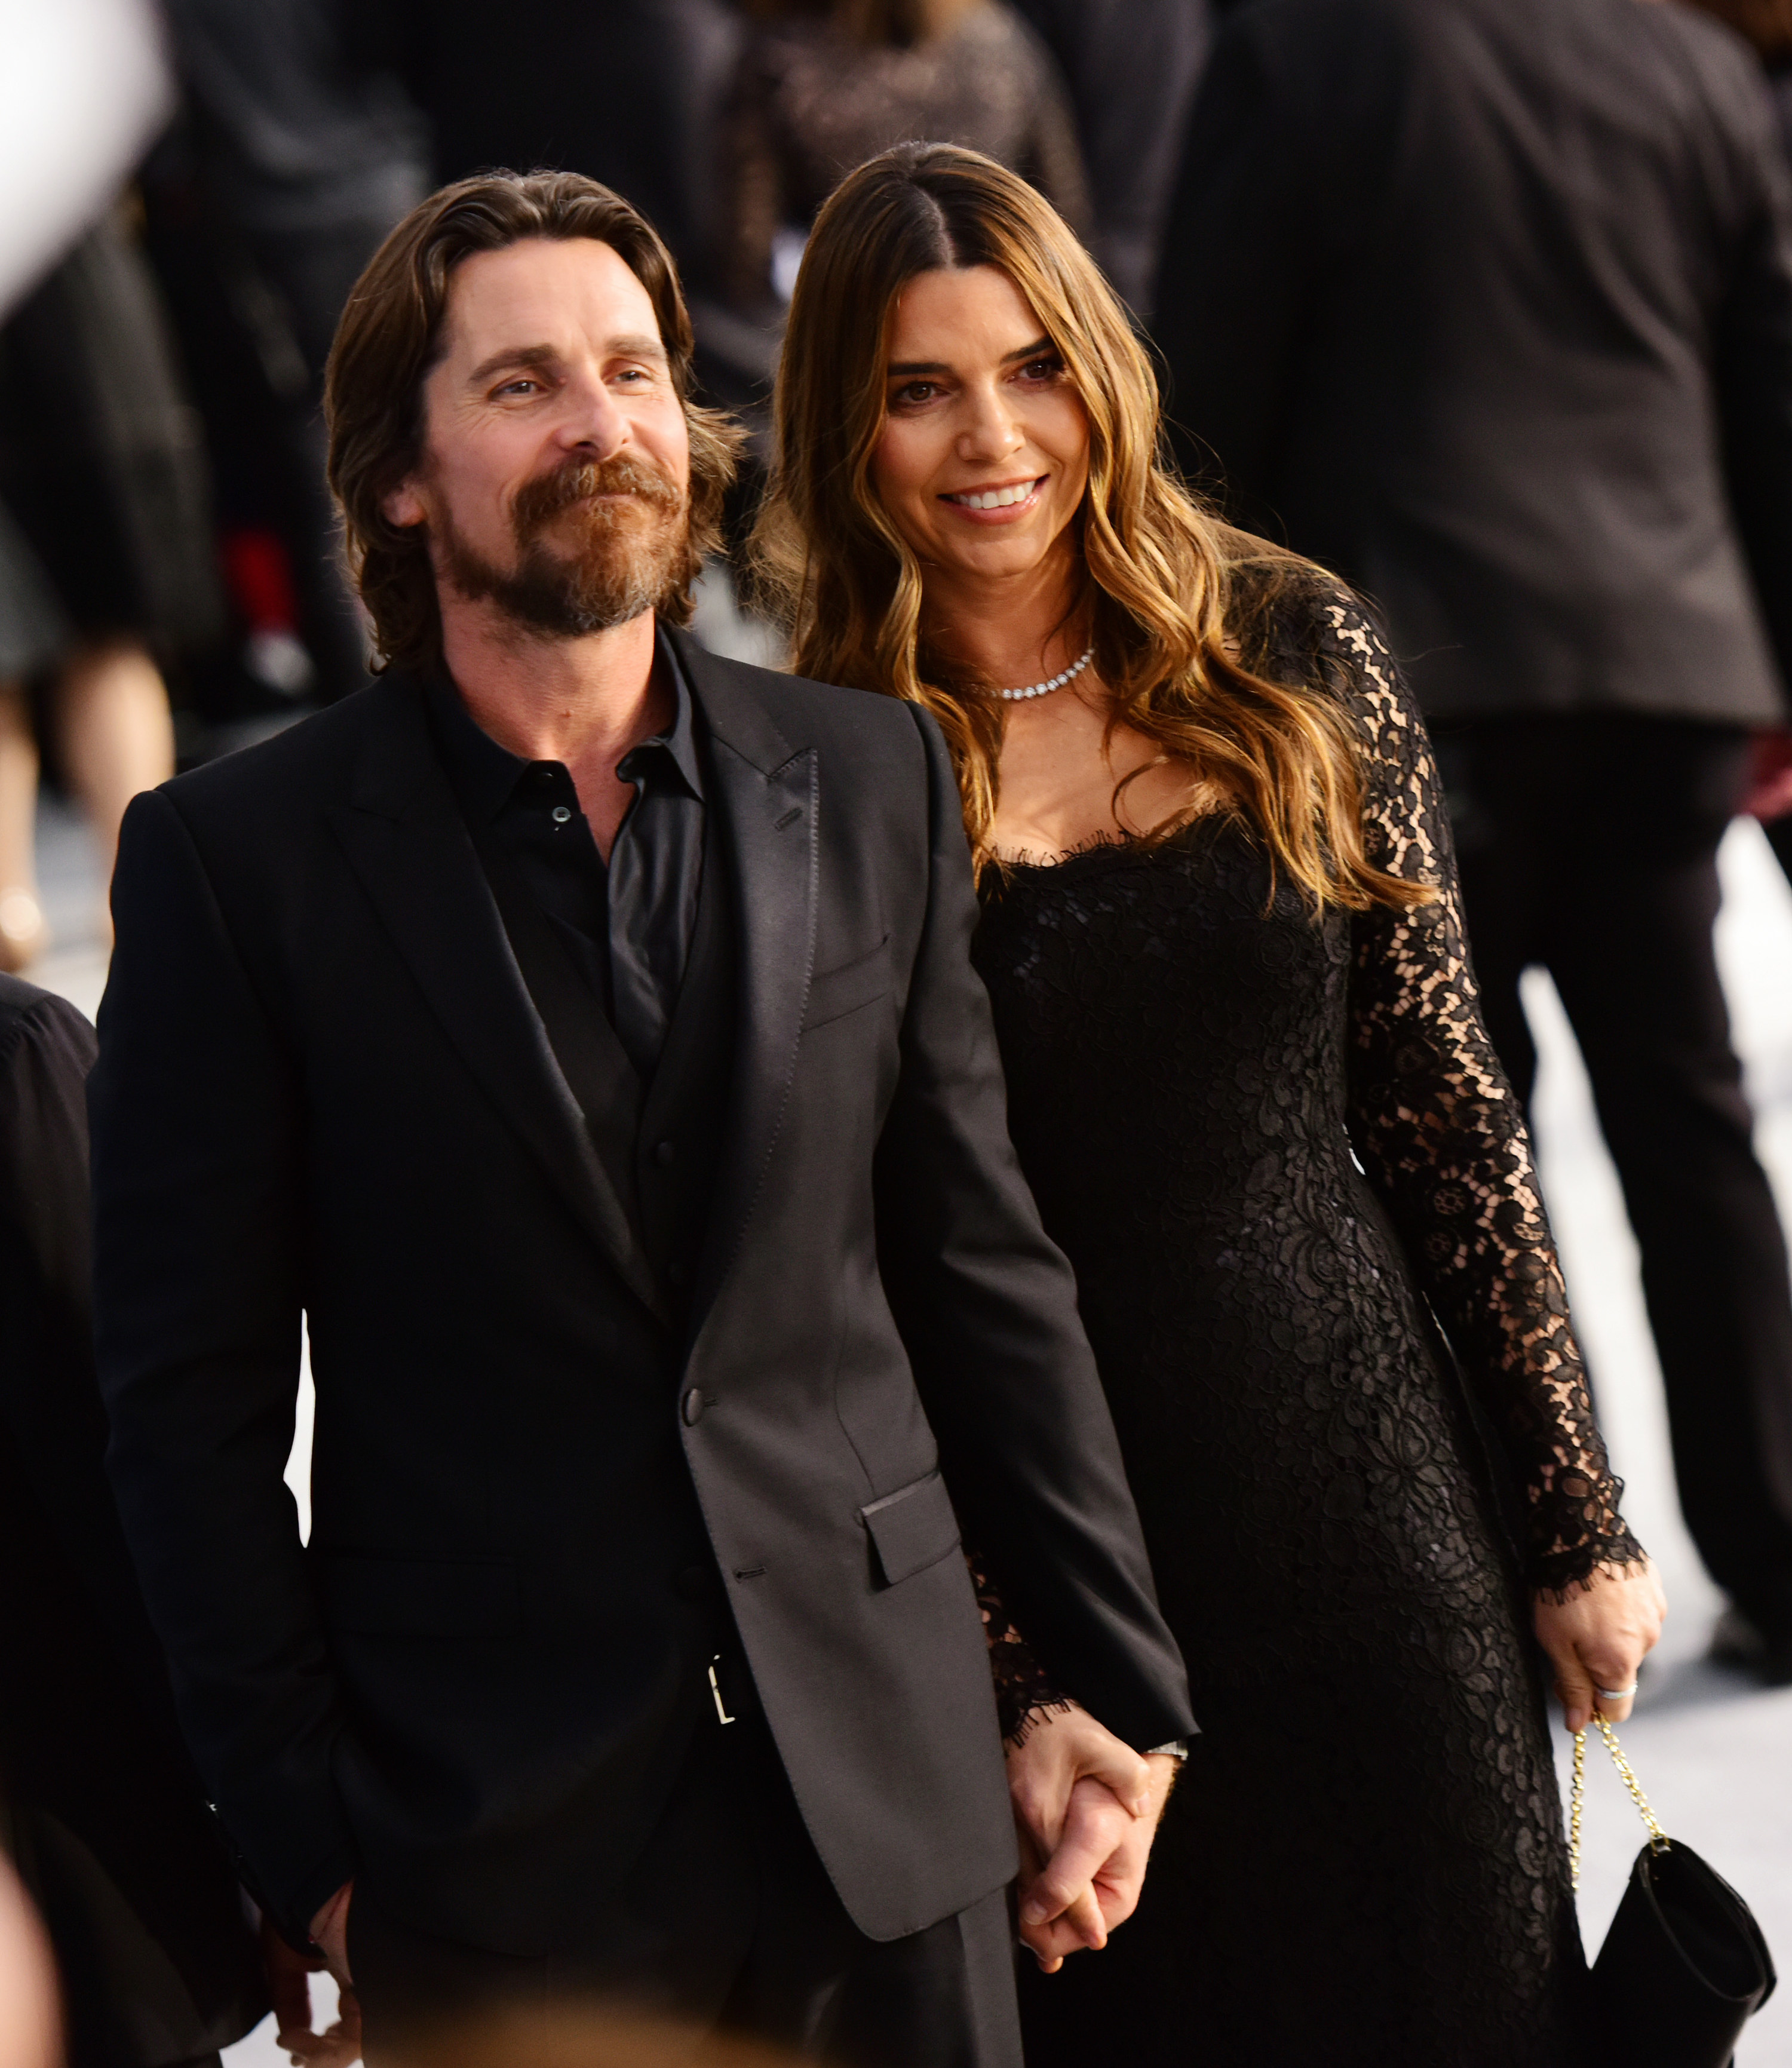 Christian Bale and Sibi Blazic attend the 26th annual Screen Actors Guild Awards